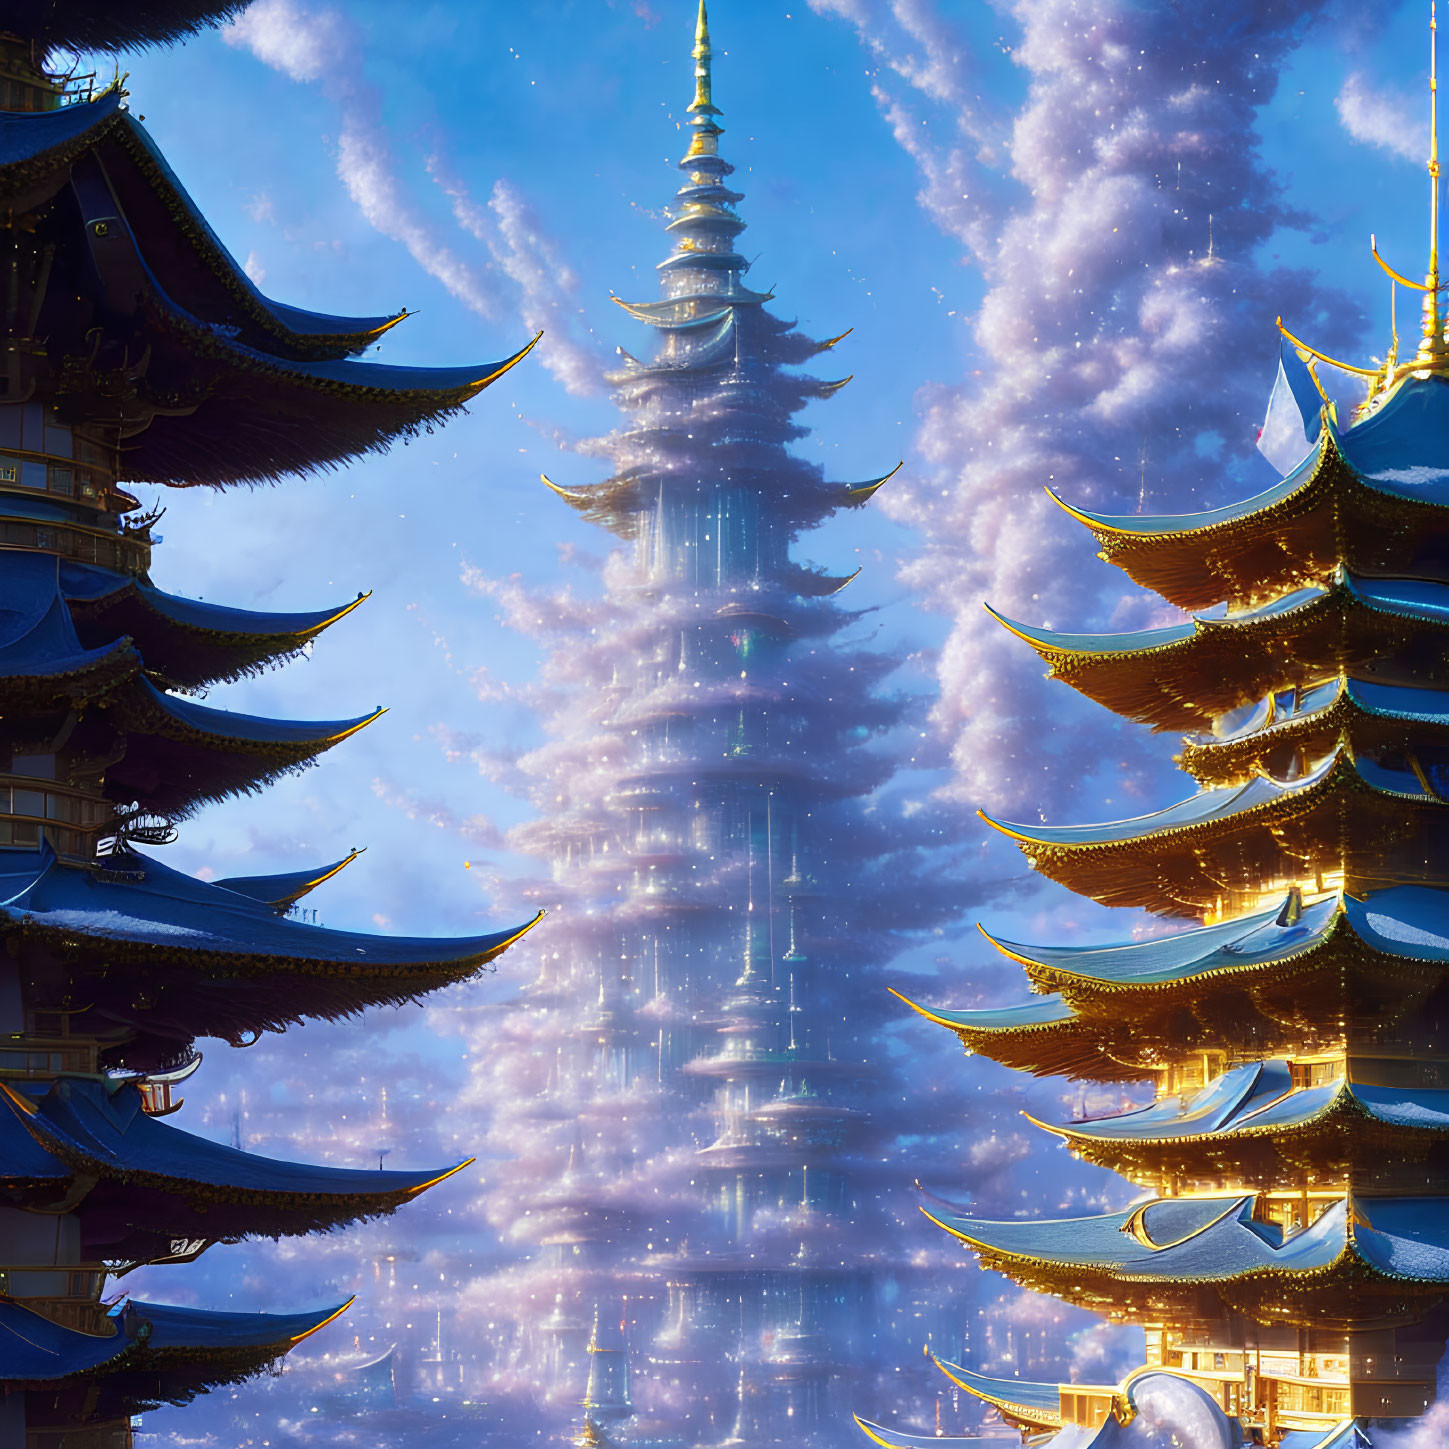 Majestic Pagoda with Golden Eaves Under Starry Sky